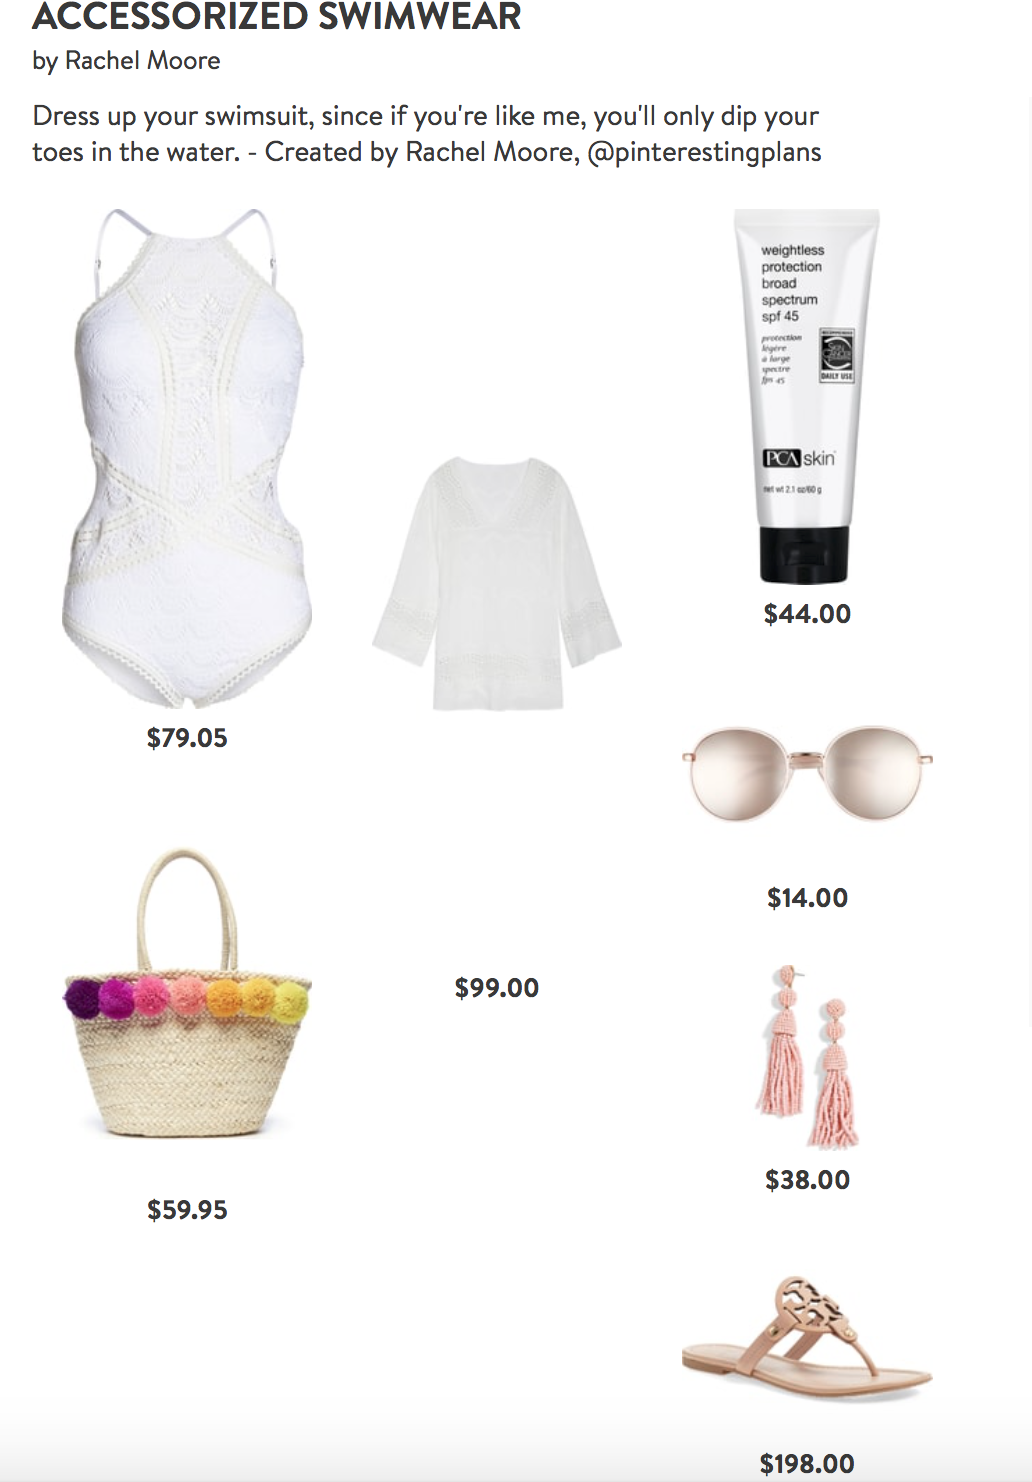 What To Know About the Nordstrom Anniversary Sale 2018 and an accessorized swimsuit Summer outfit